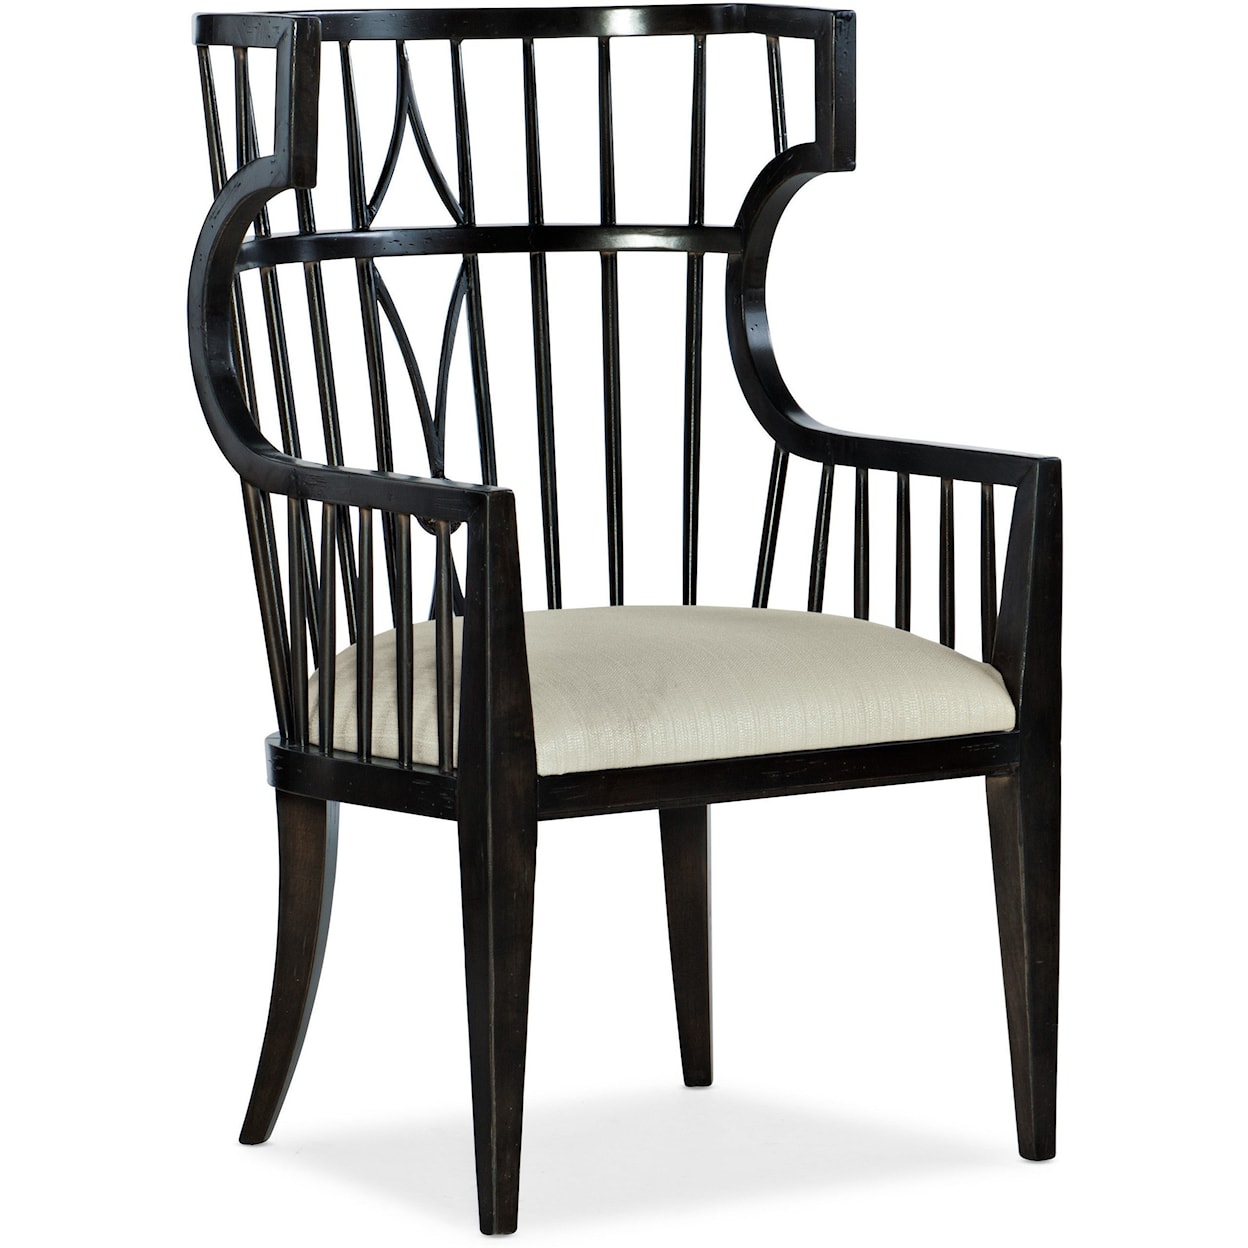 Hooker Furniture Sanctuary Contemporary Host Chair